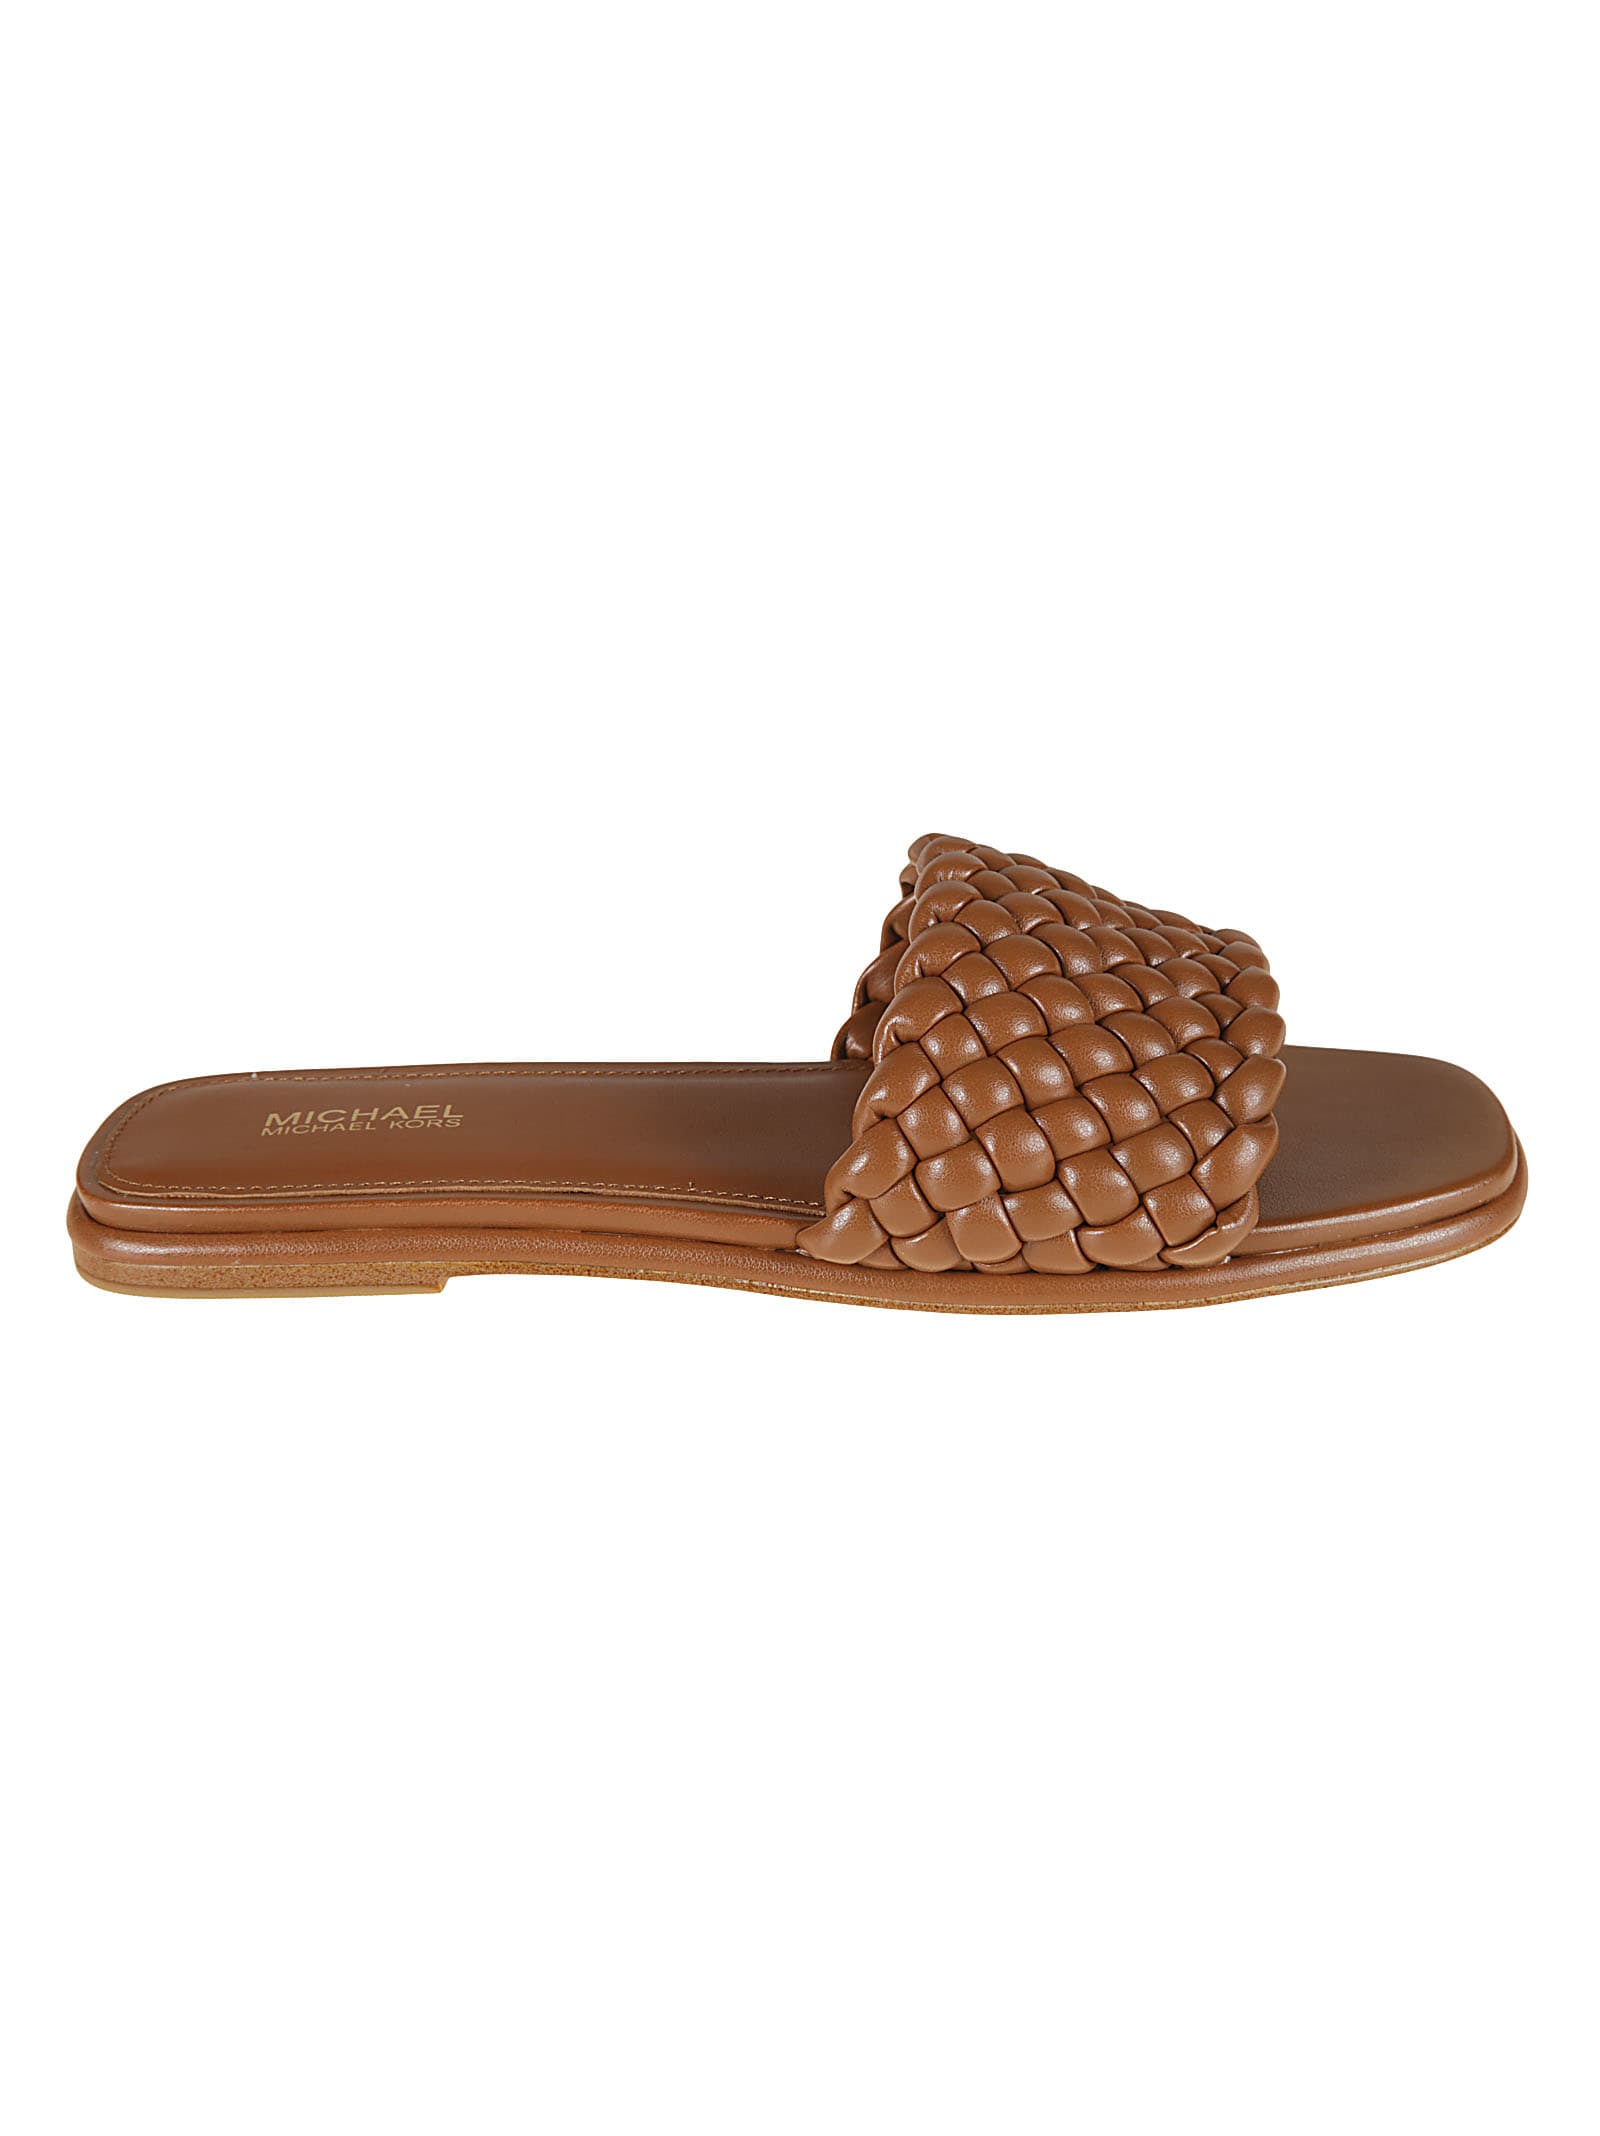 Buy Michael Kors Amelia Flat Sandals online, shop Michael Kors shoes with free shipping